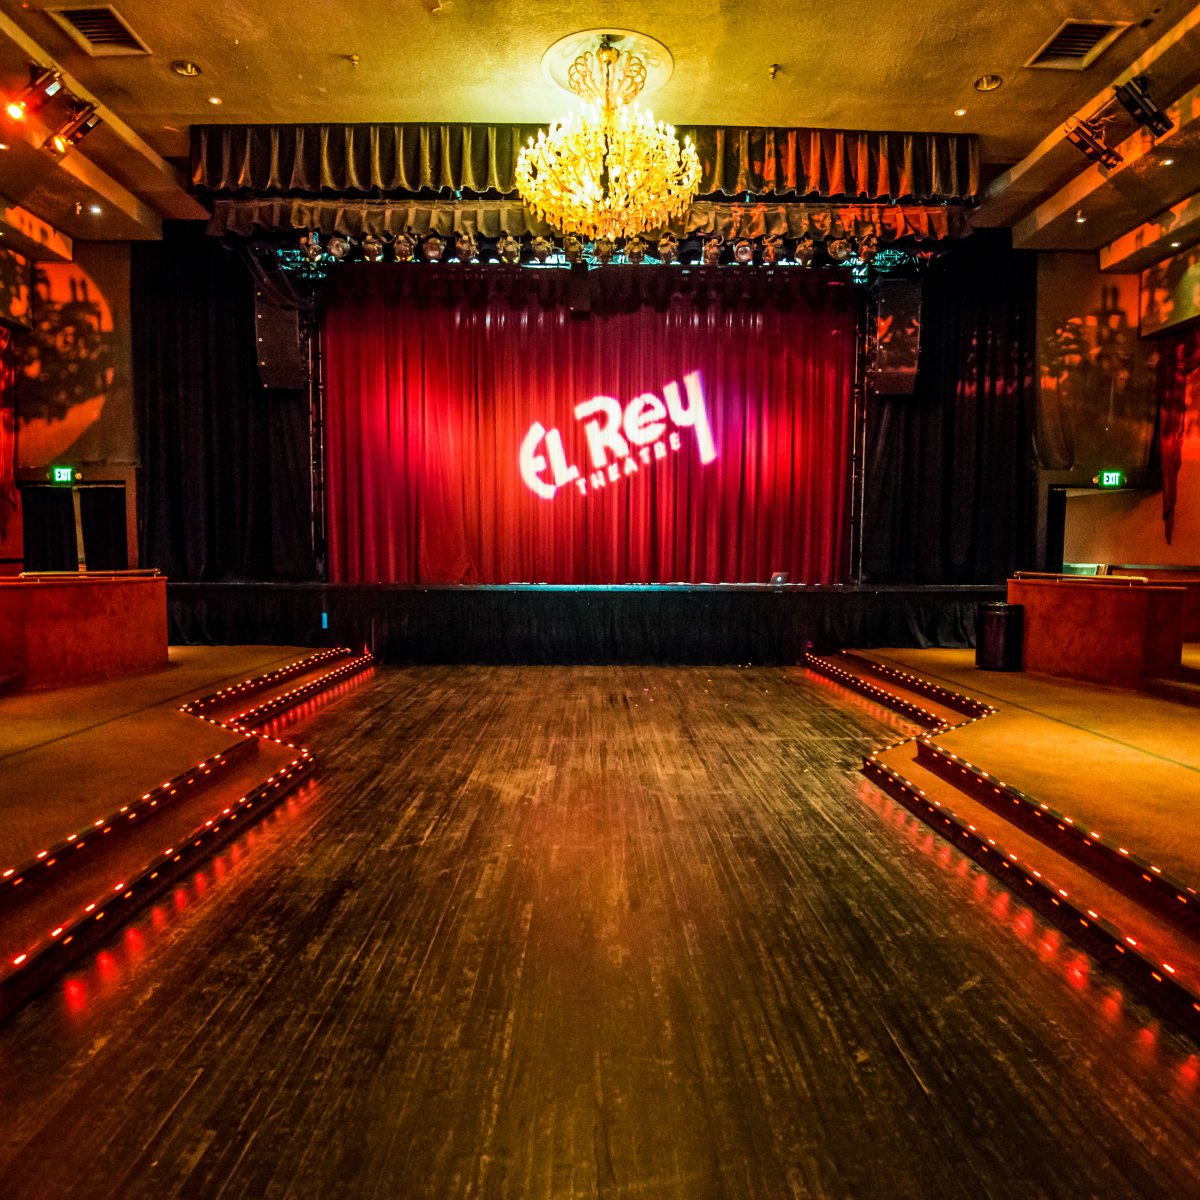 Dimly lit interior shot of El Rey and stage without guests